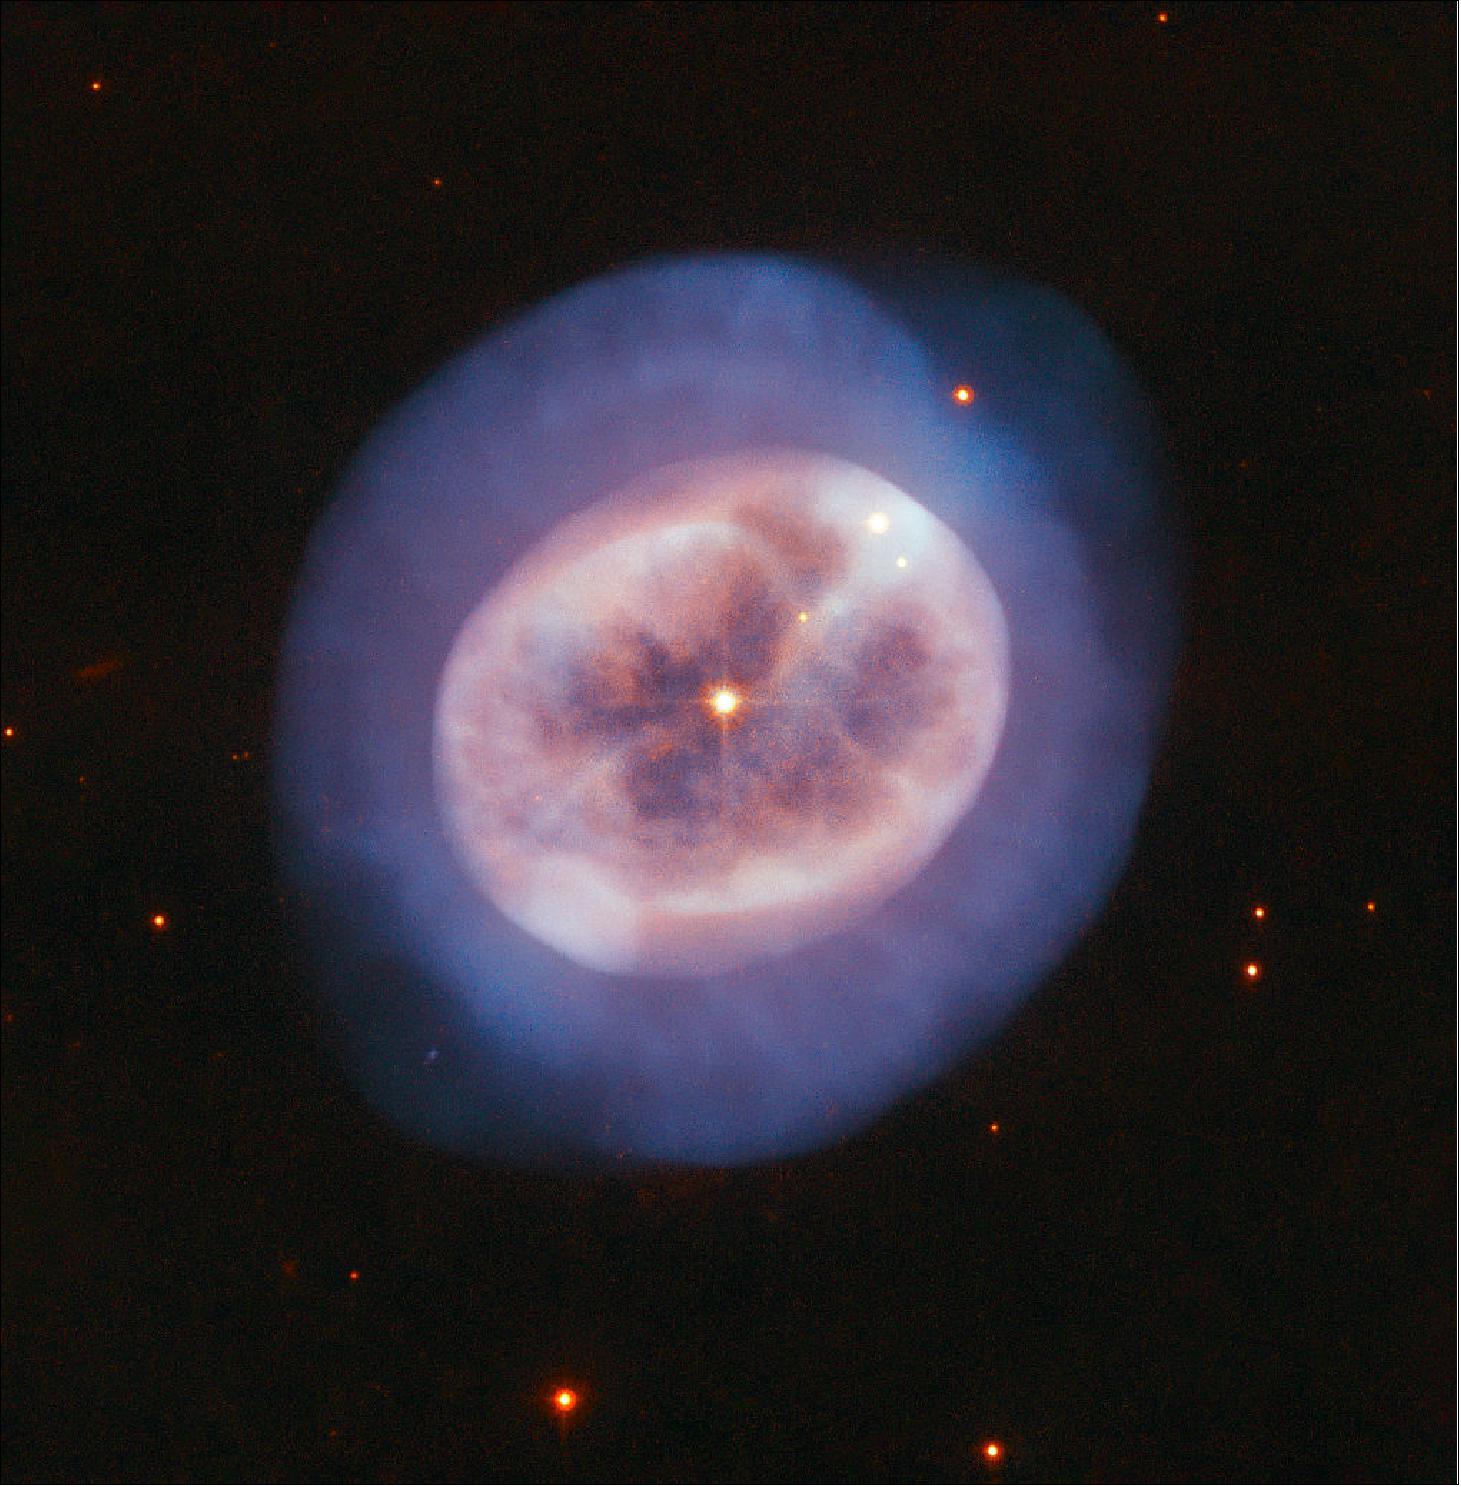 Figure 31: Although it looks more like an entity seen through a microscope than a telescope, this rounded object, named NGC 2022, is certainly no alga or tiny, blobby jellyfish. Instead, it is a vast orb of gas in space, cast off by an ageing star. The star is visible in the orb's center, shining through the gases it formerly held onto for most of its stellar life (image credit: ESA/Hubble & NASA, R. Wade; CC BY 4.0)